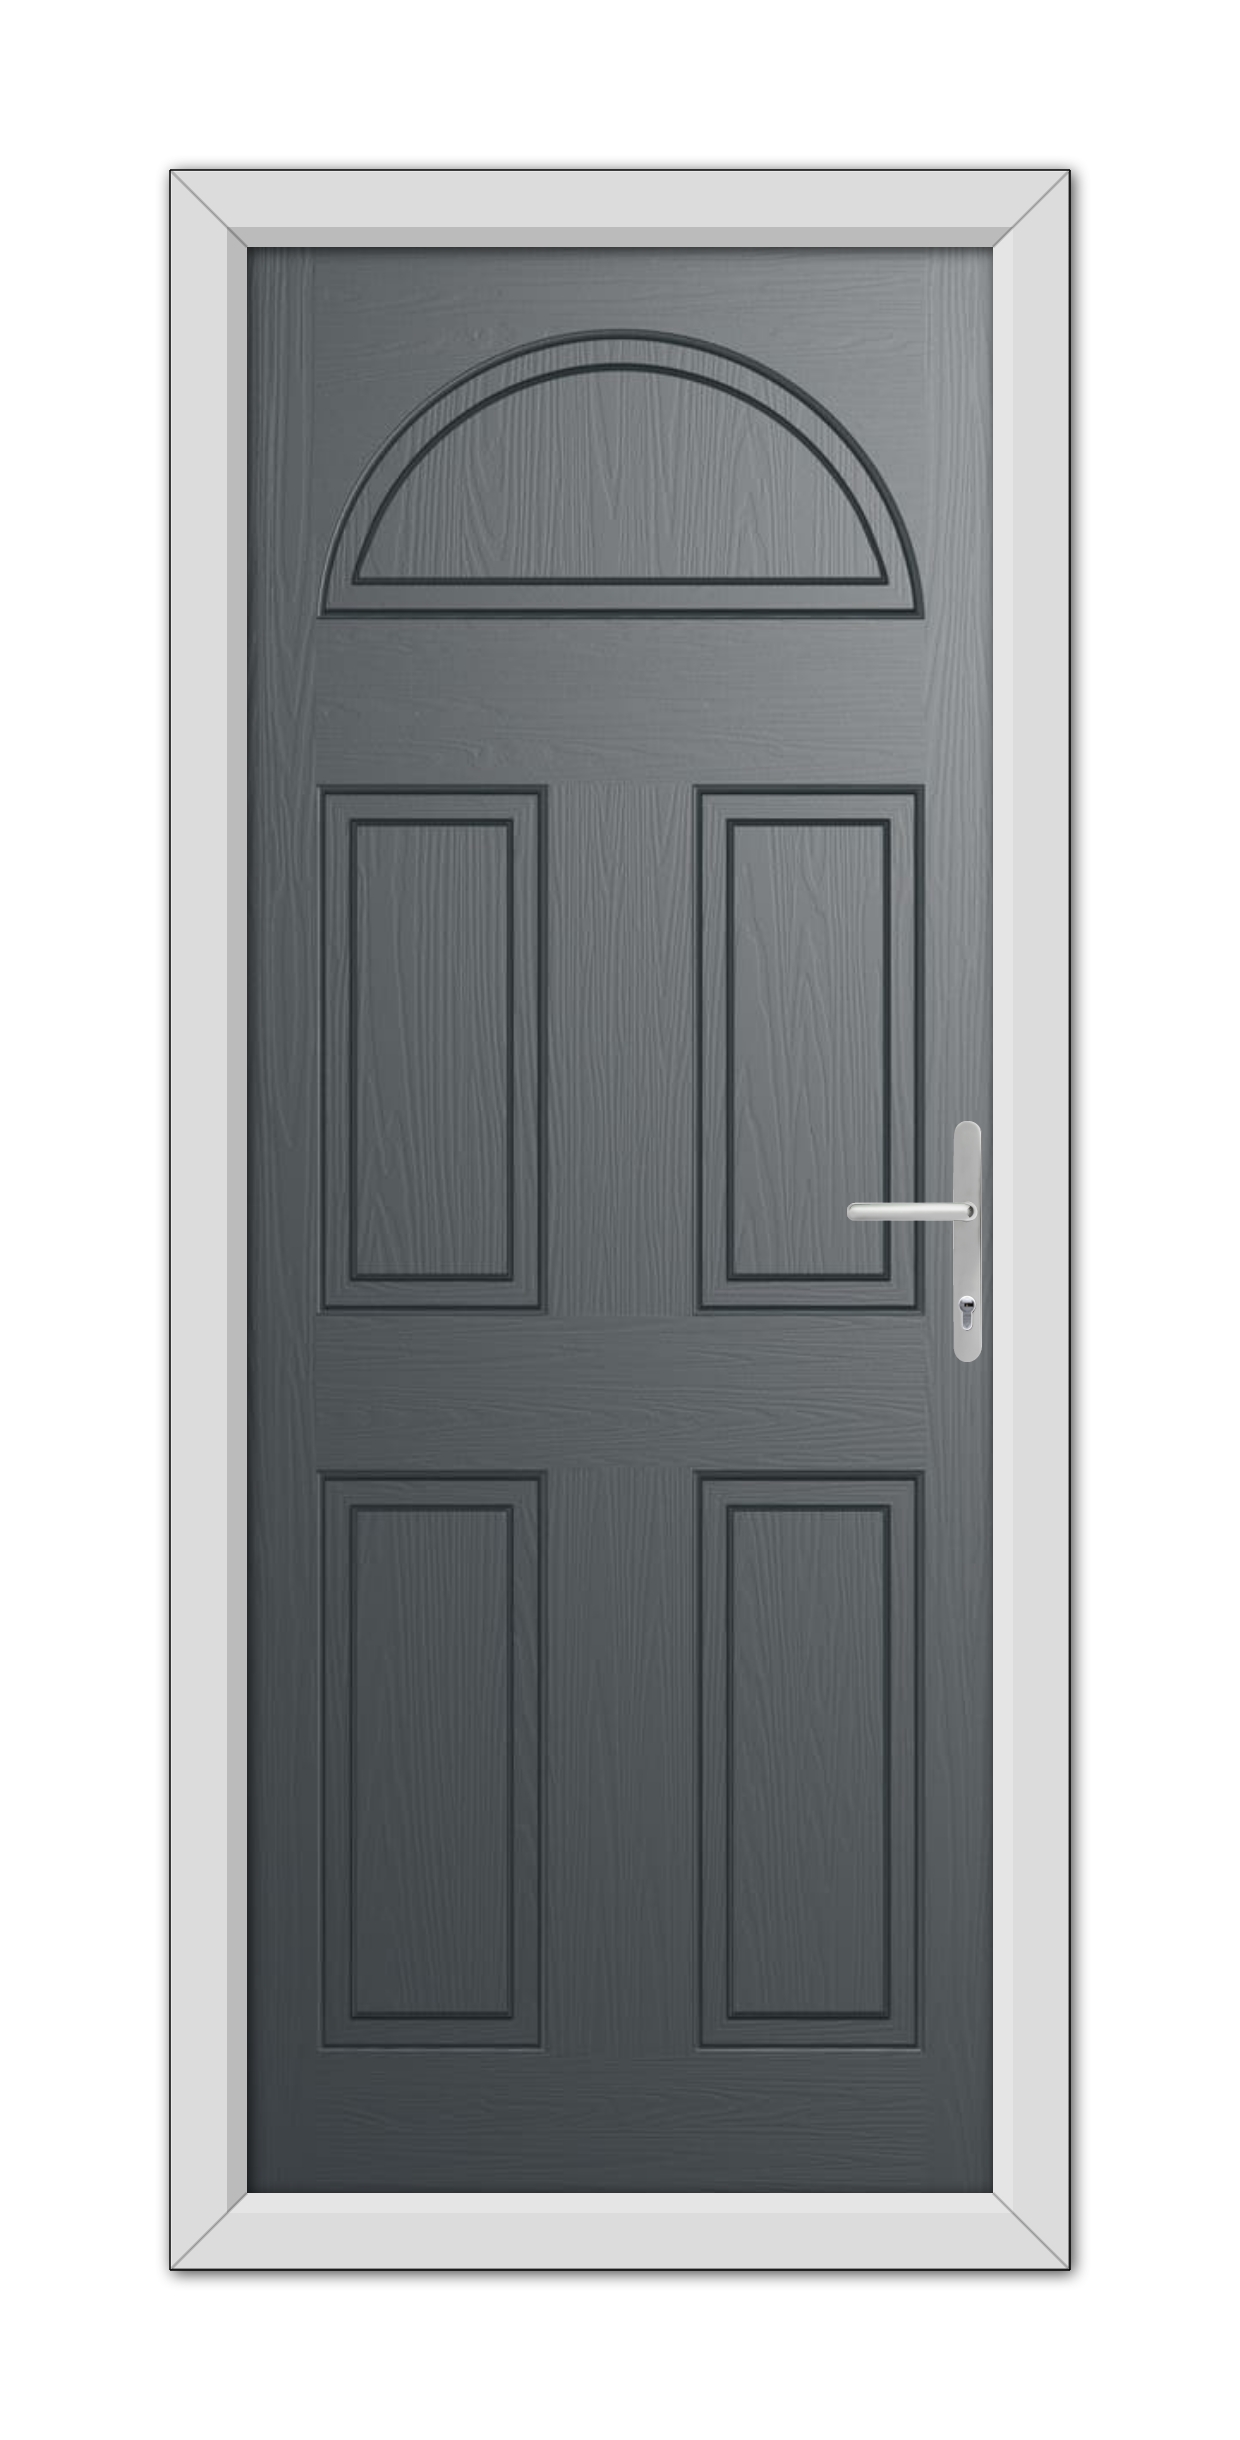 A modern Anthracite Grey Middleton Solid Stable Composite Door 48mm Timber Core with six panels and a semicircular window at the top, featuring a metallic handle on the right side.